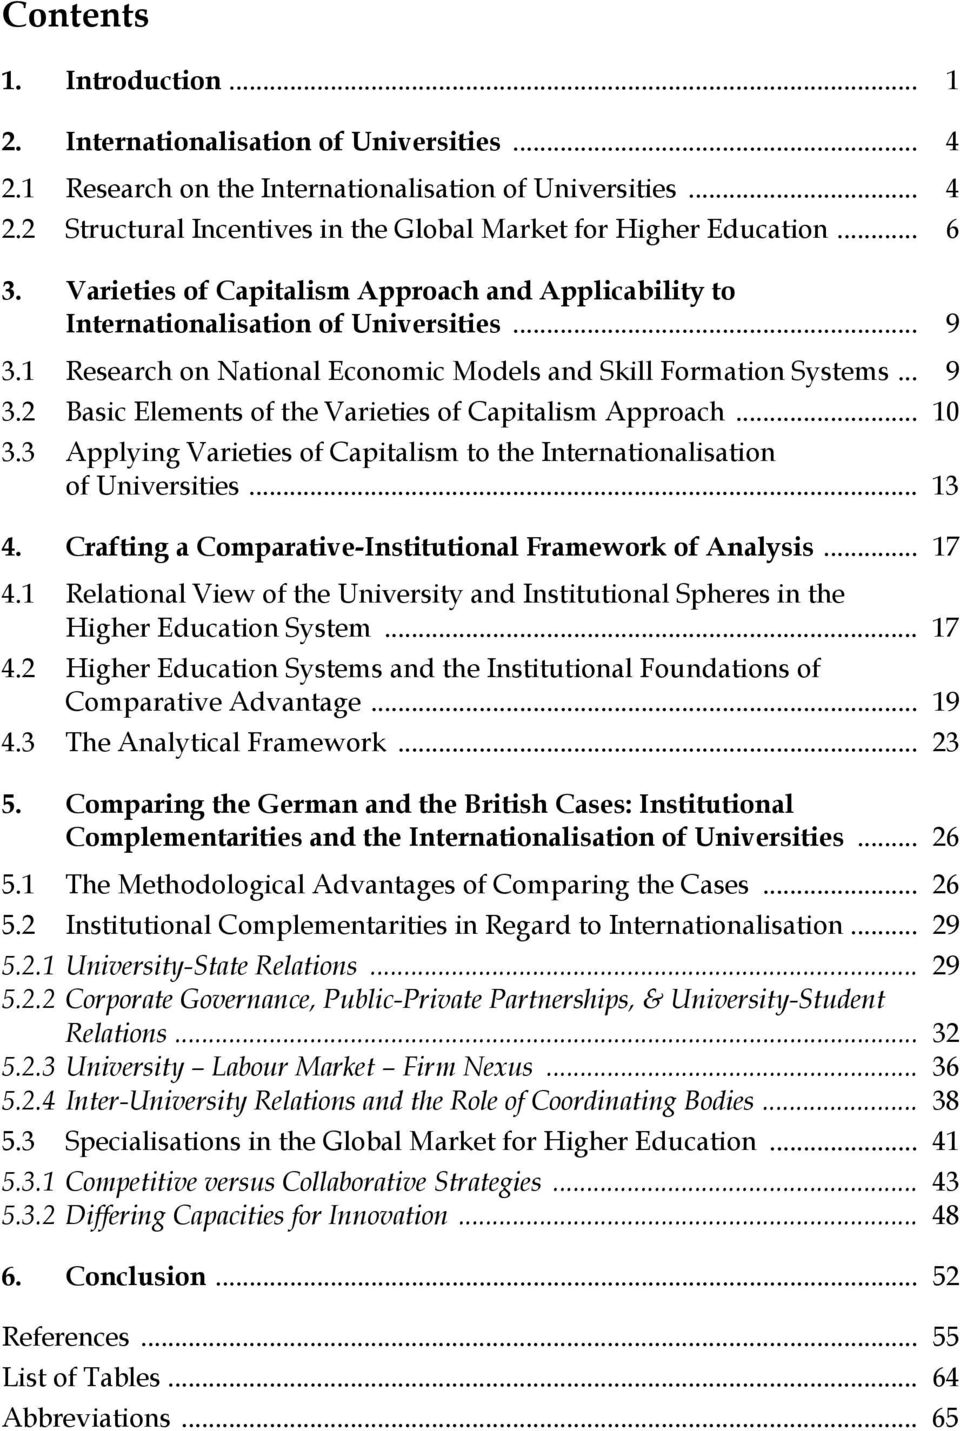 .. 10 3.3 Applying Varieties of Capitalism to the Internationalisation of Universities... 13 4. Crafting a Comparative-Institutional Framework of Analysis... 17 4.